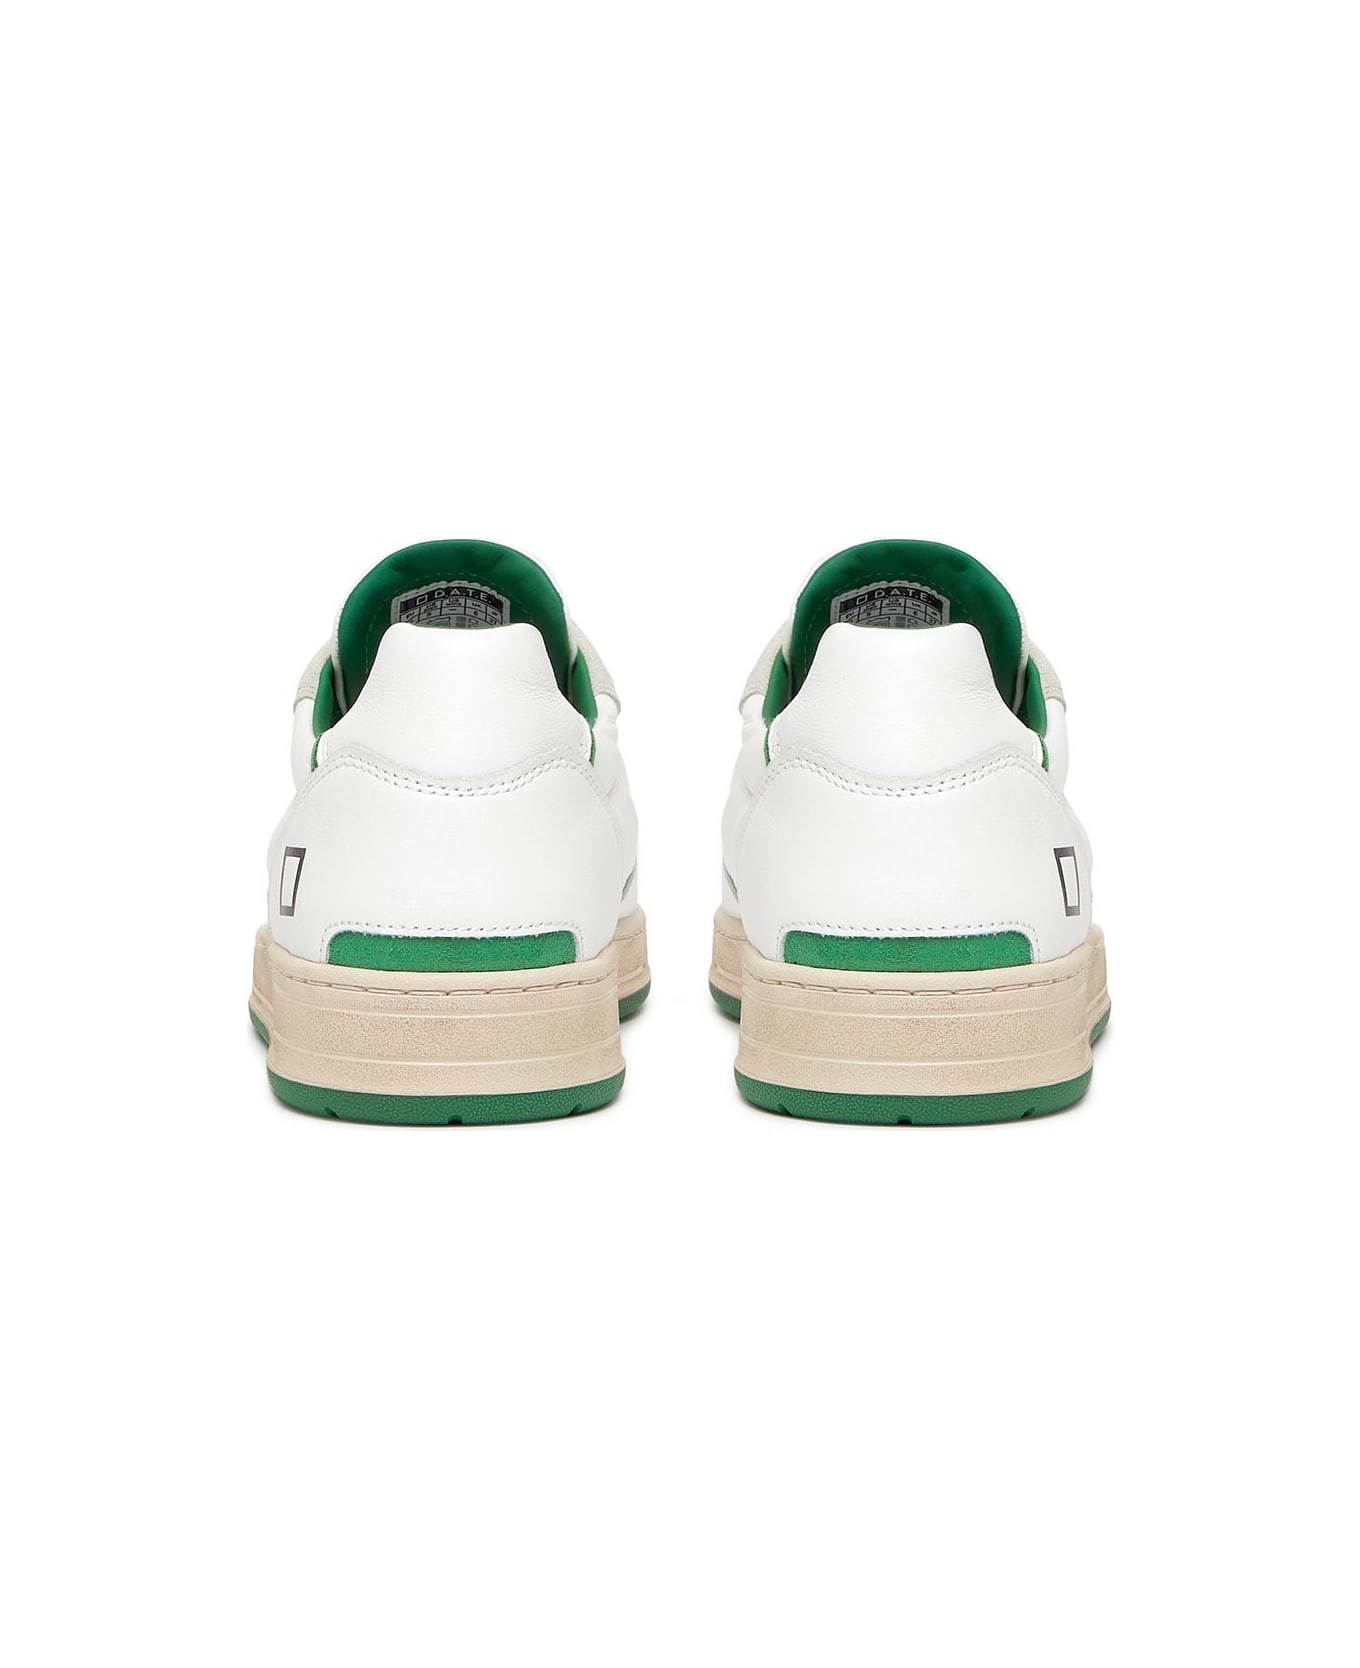 D.A.T.E. Court 2.0 White Green Leather Sneaker - WHITE GREEN